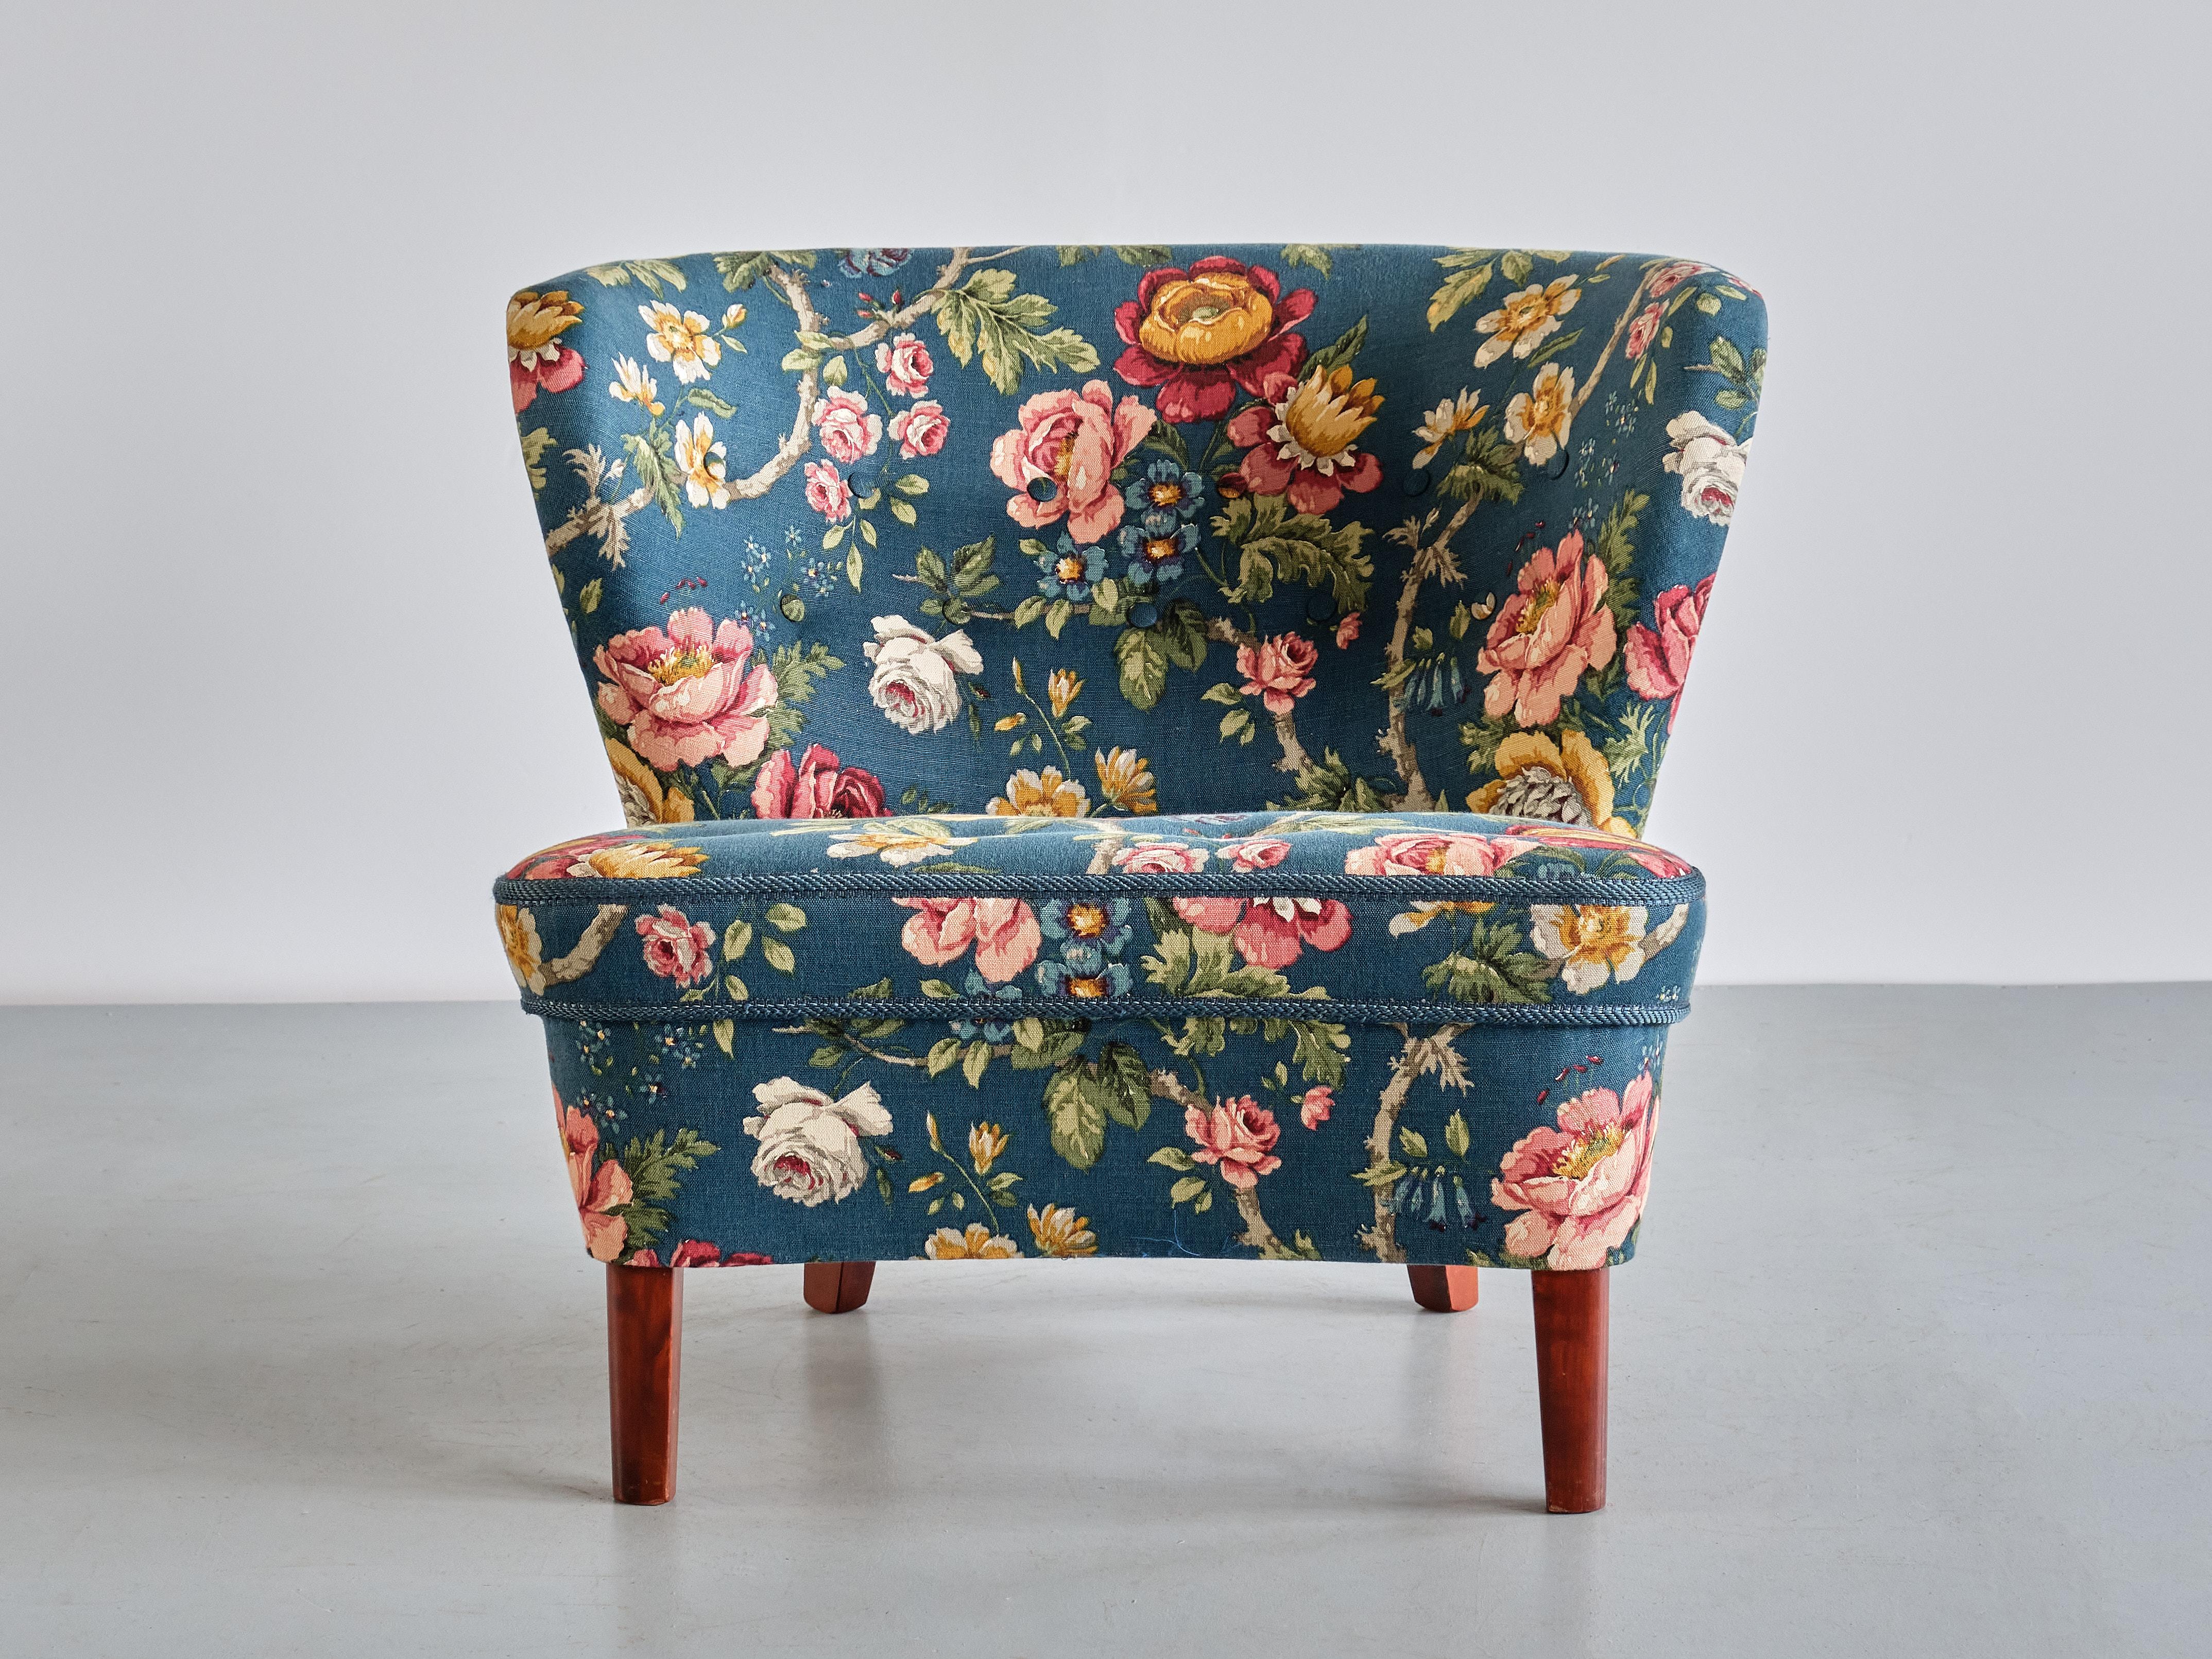 Scandinavian Modern Gösta Jonsson Lounge Chair in Floral Fabric and Birch, Sweden, 1940s For Sale